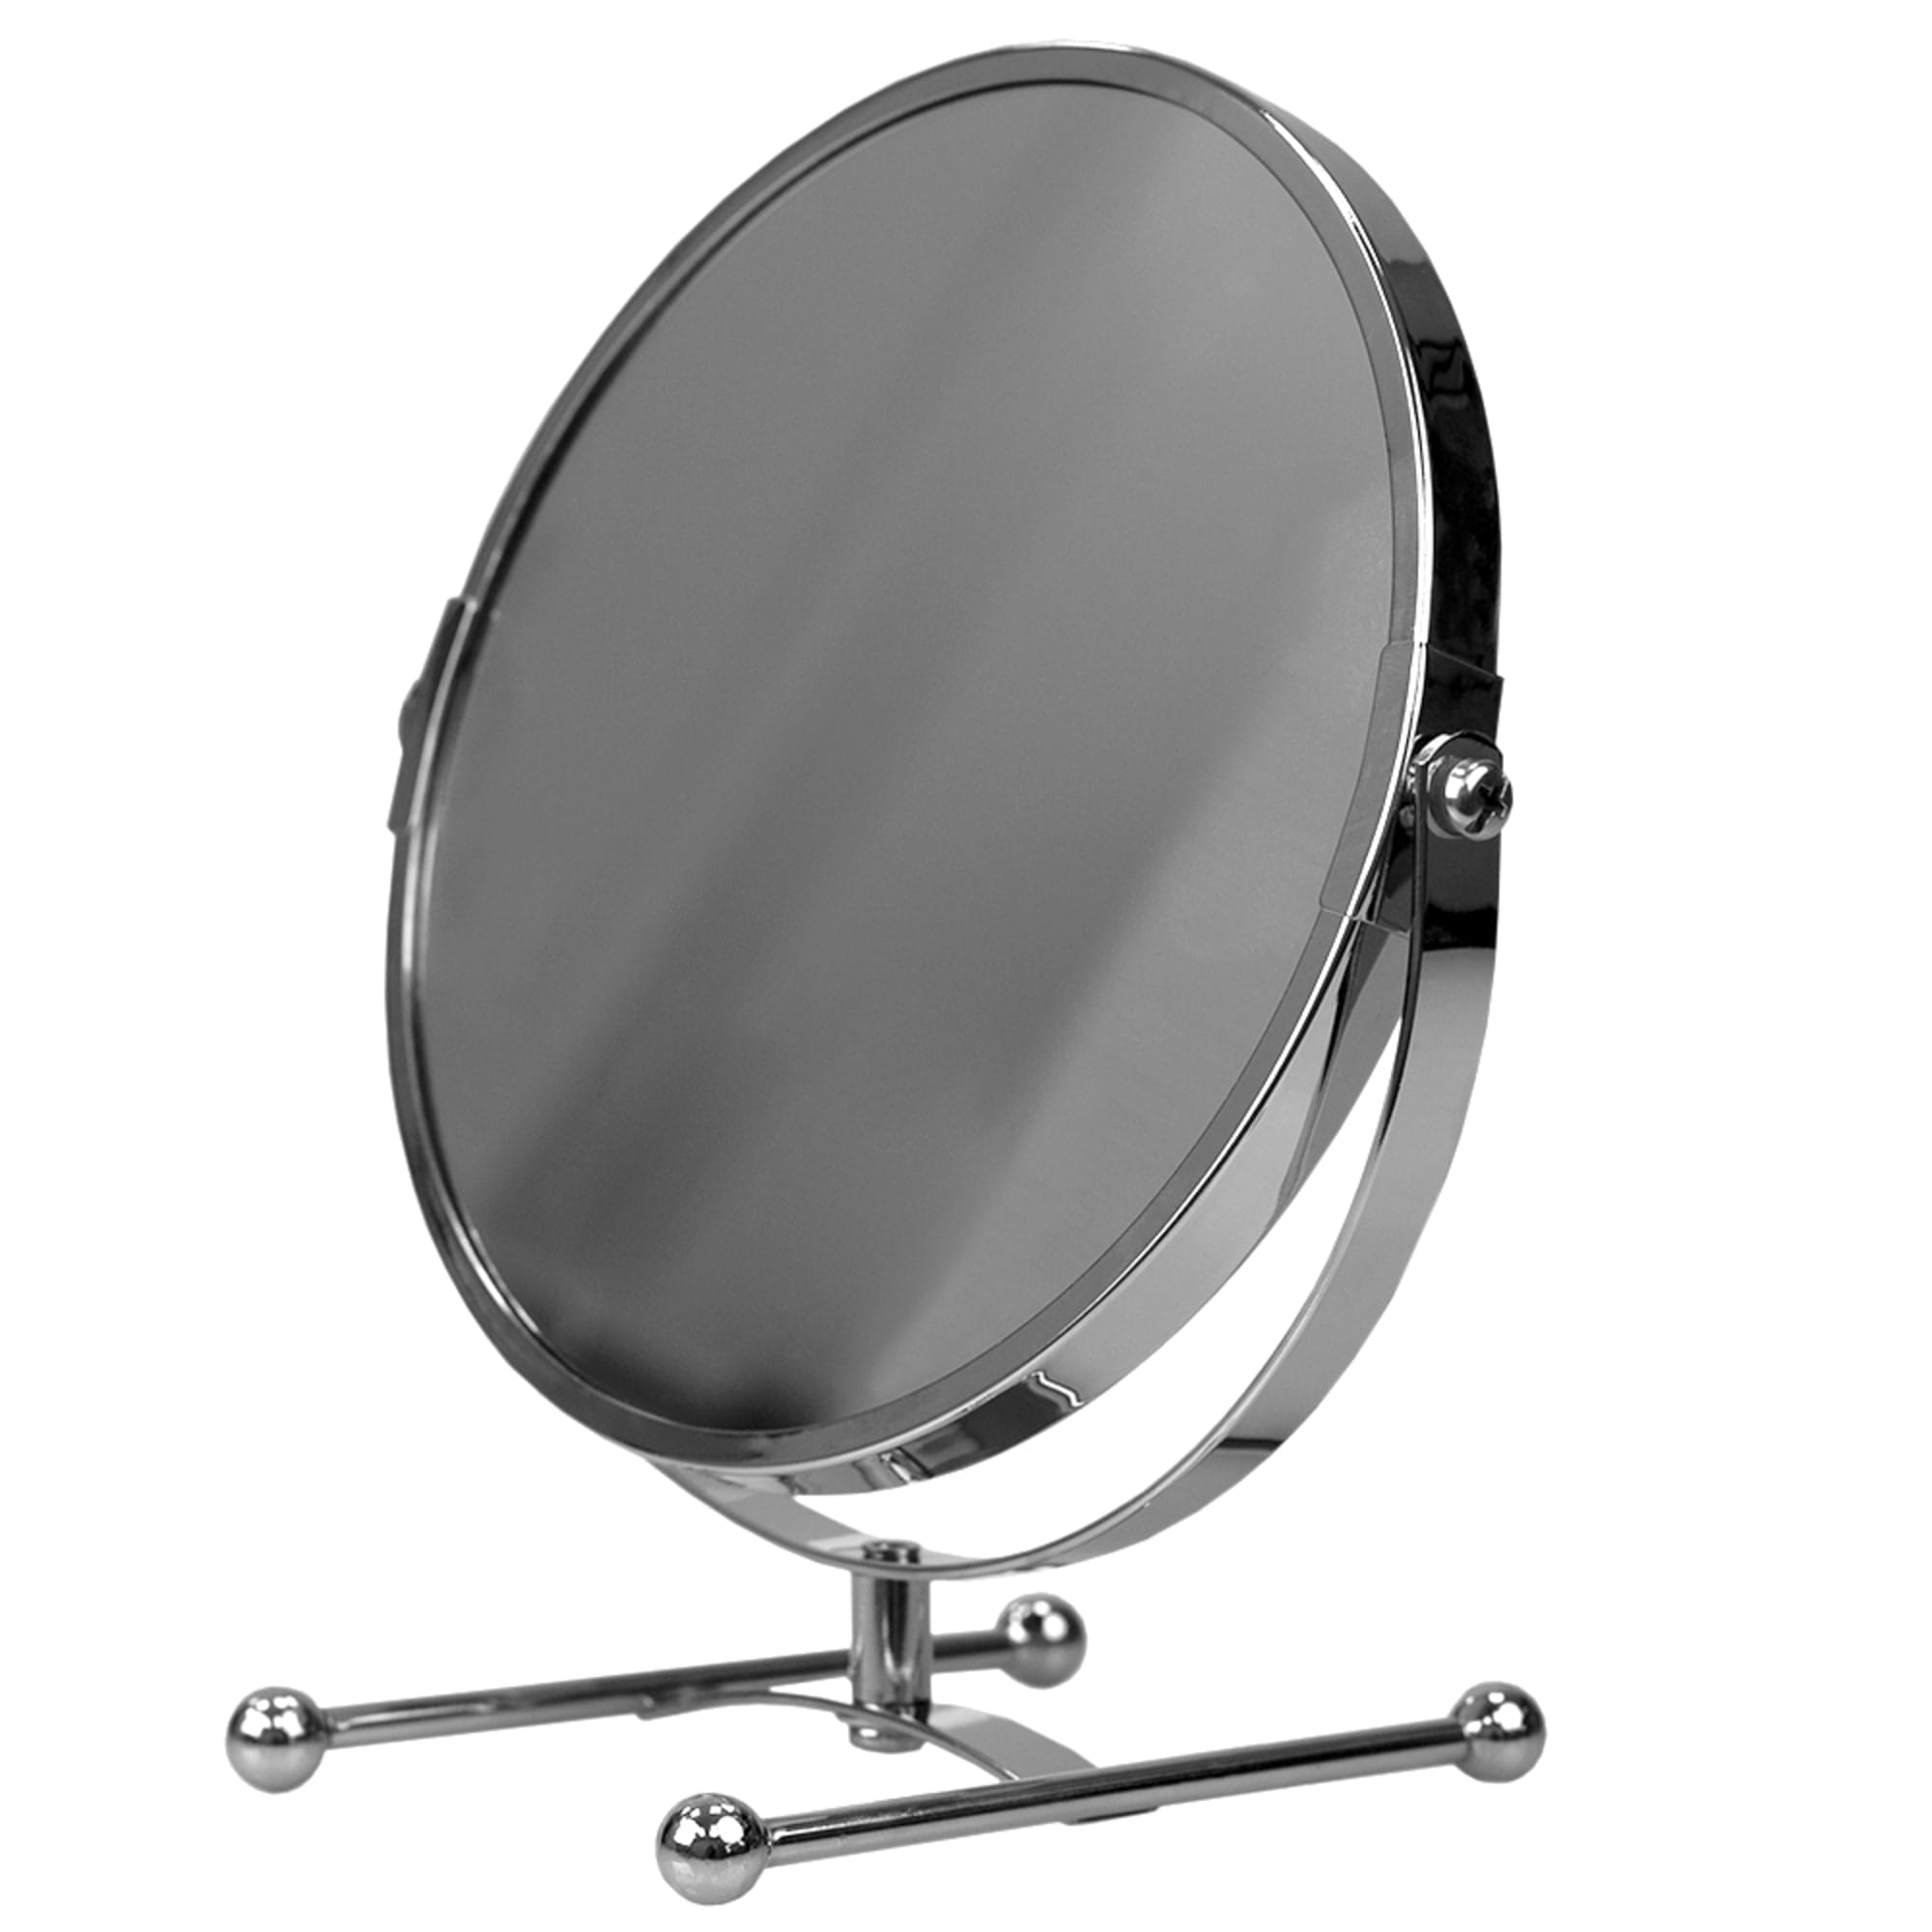 Home Basics Double Sided Countertop Cosmetic Mirror, Chrome $8.00 EACH, CASE PACK OF 6